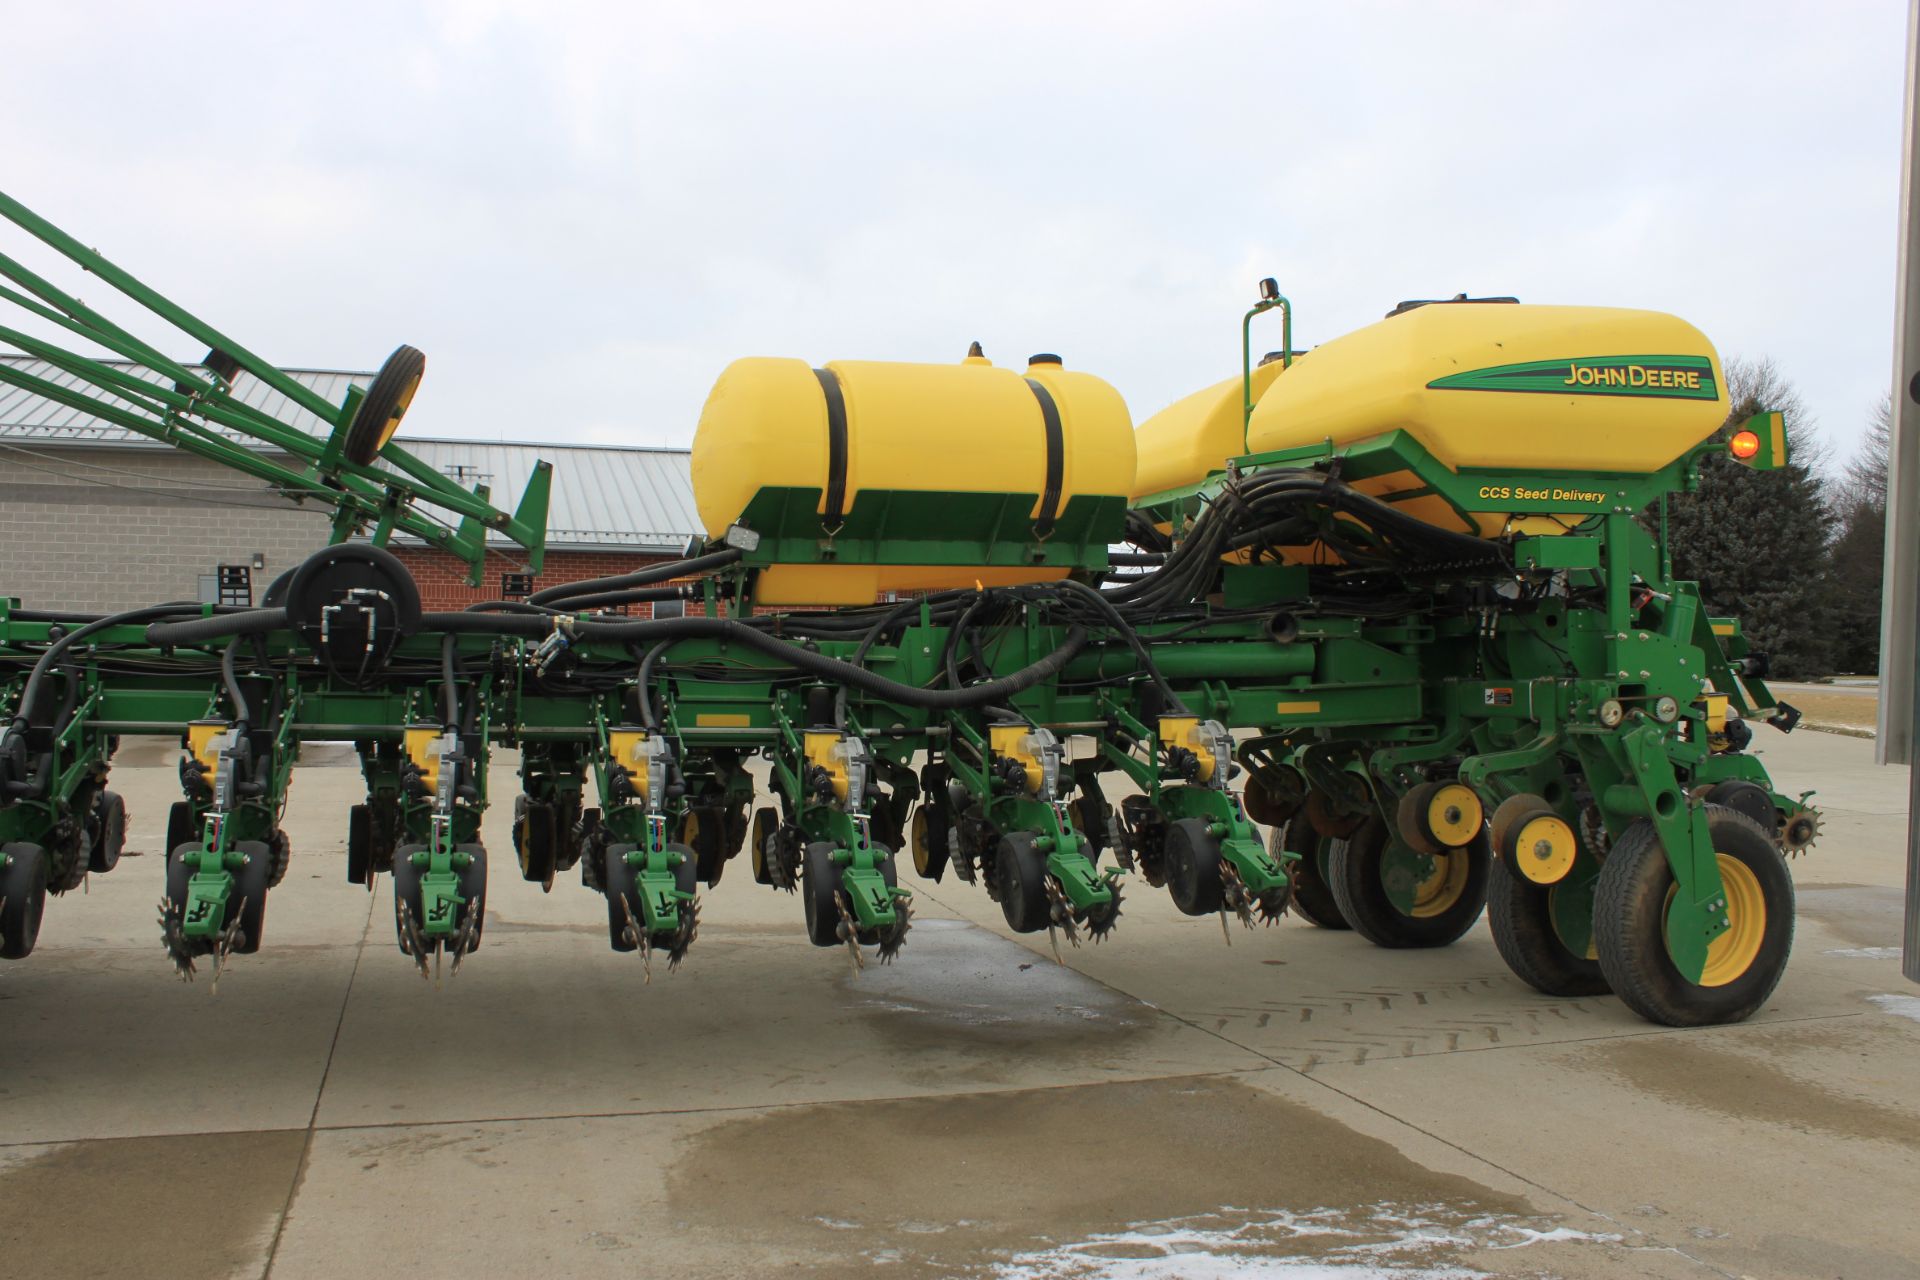 Planter 1770 (2013) - A01770CPDM755335 - 24 row 30"row spacing, active pneunamatic down force - Image 2 of 6